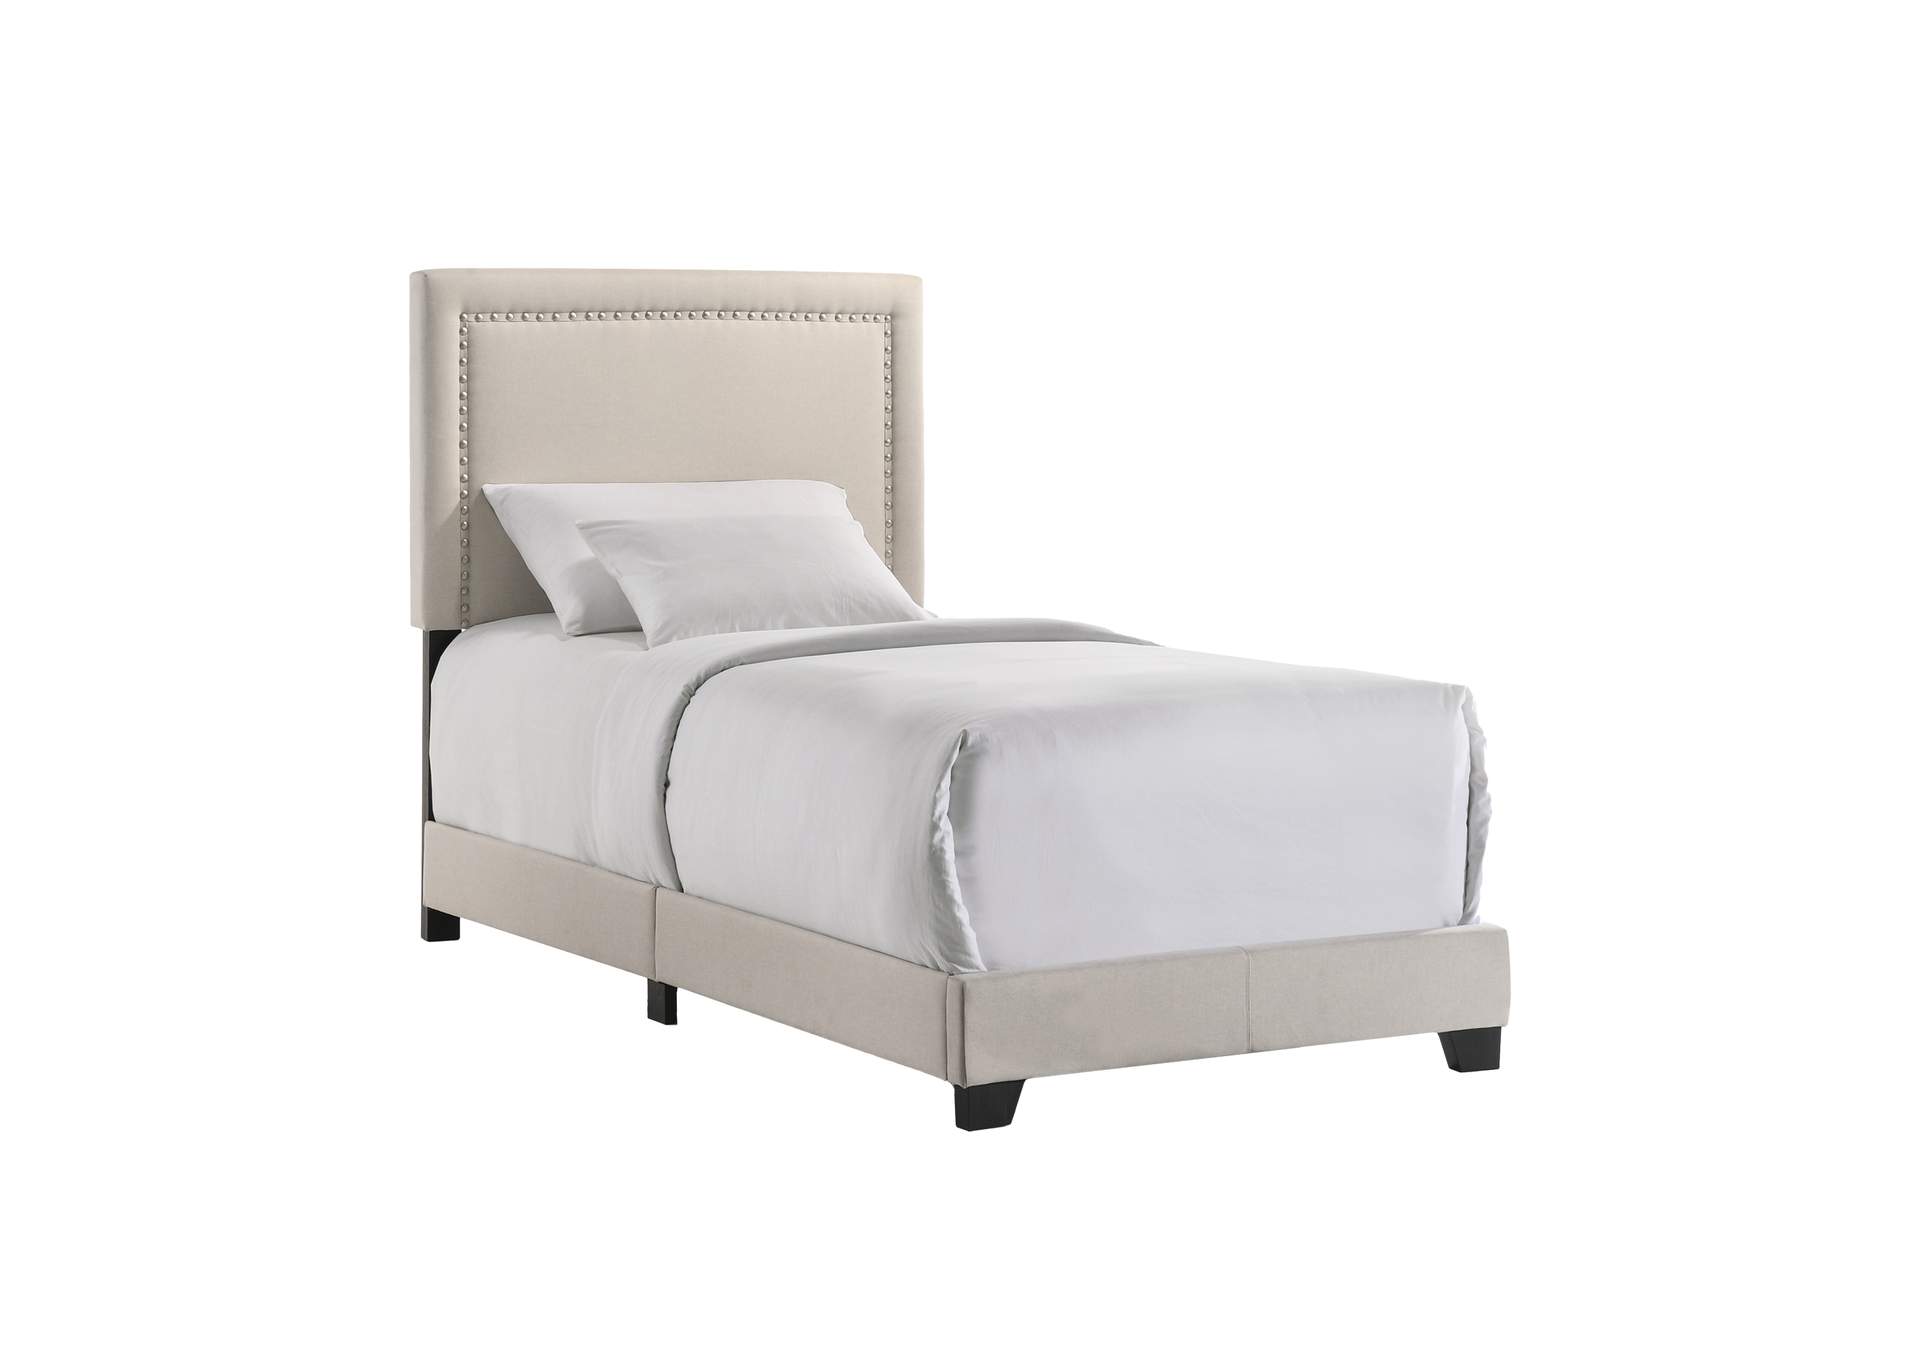 Zion Twin UPH Bed,Intercon Furniture